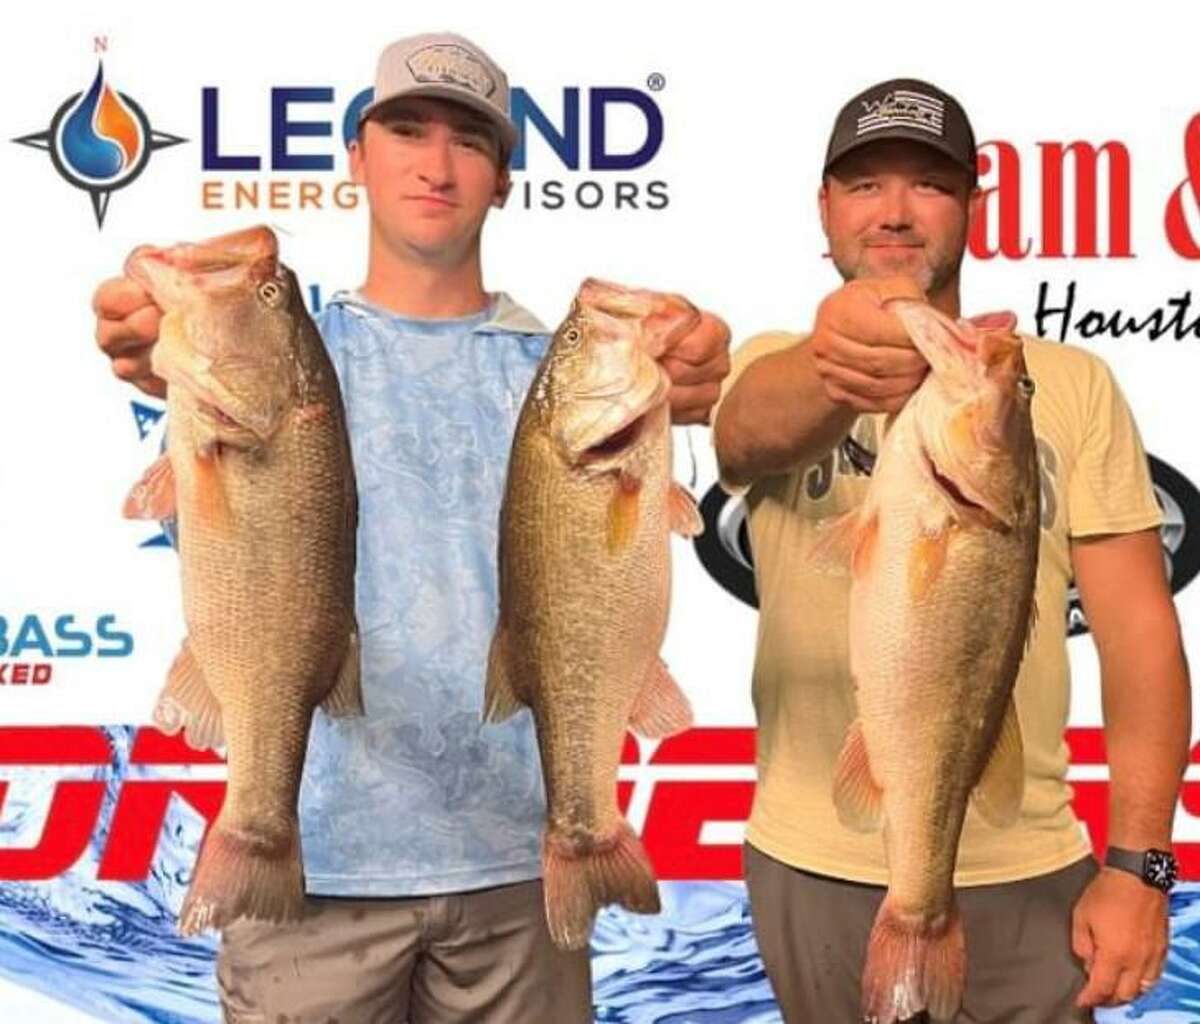 Greg McCollough and Mason Roach came in third place in the CONROEBASS Tuesday Tournament with a stringer weight of 11.93 pounds.